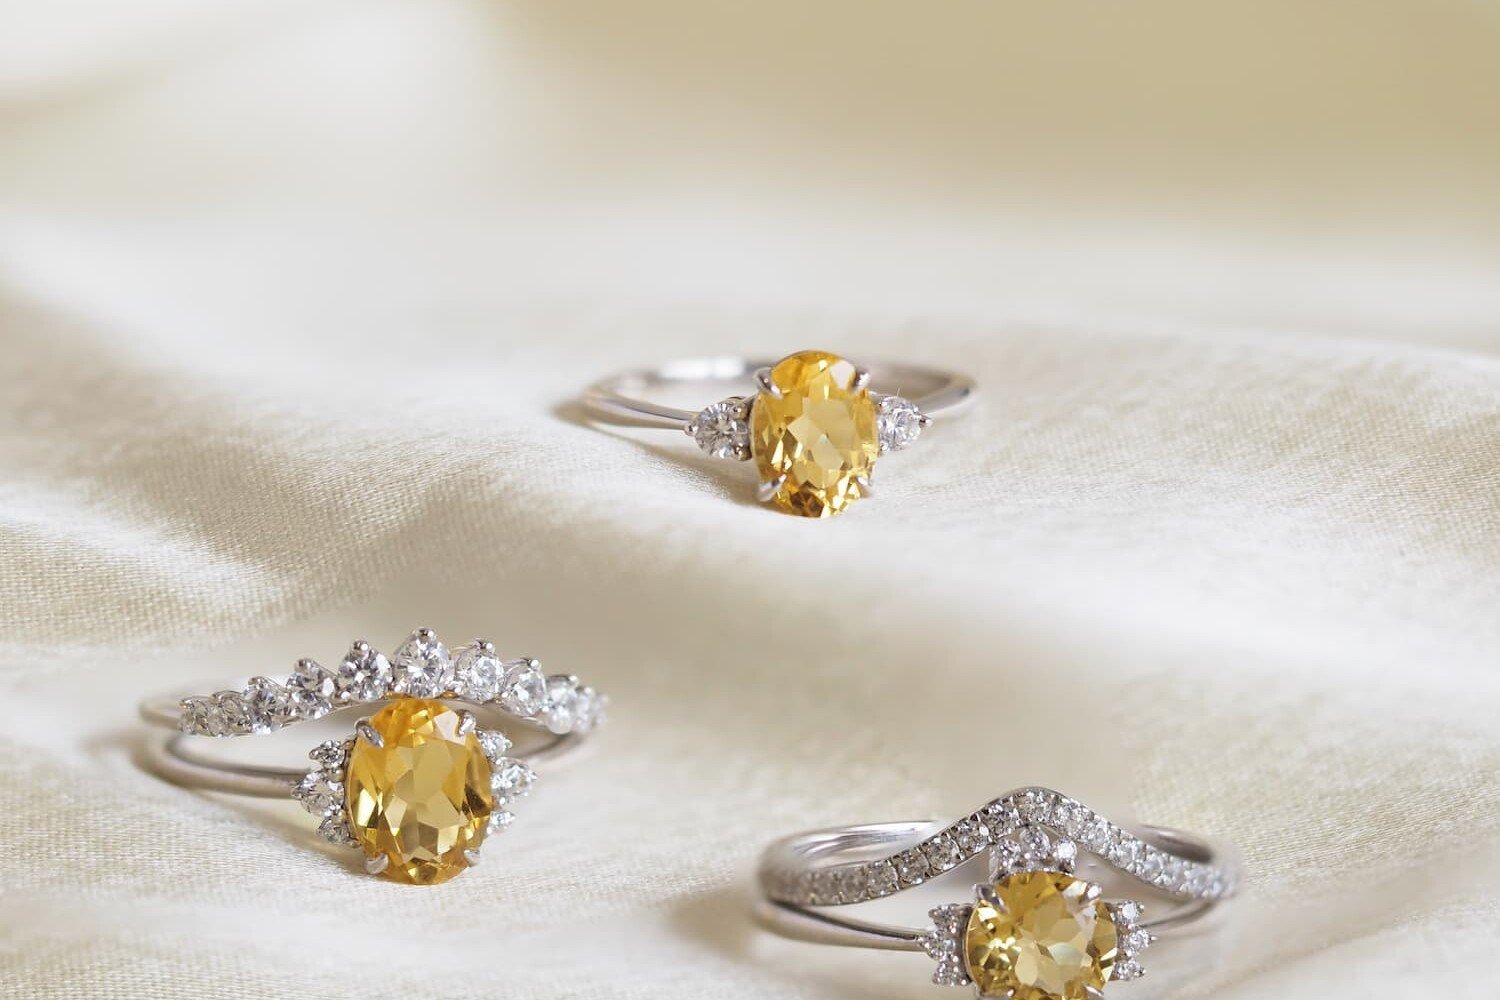 Yellow sapphire engagement rings with wedding bands